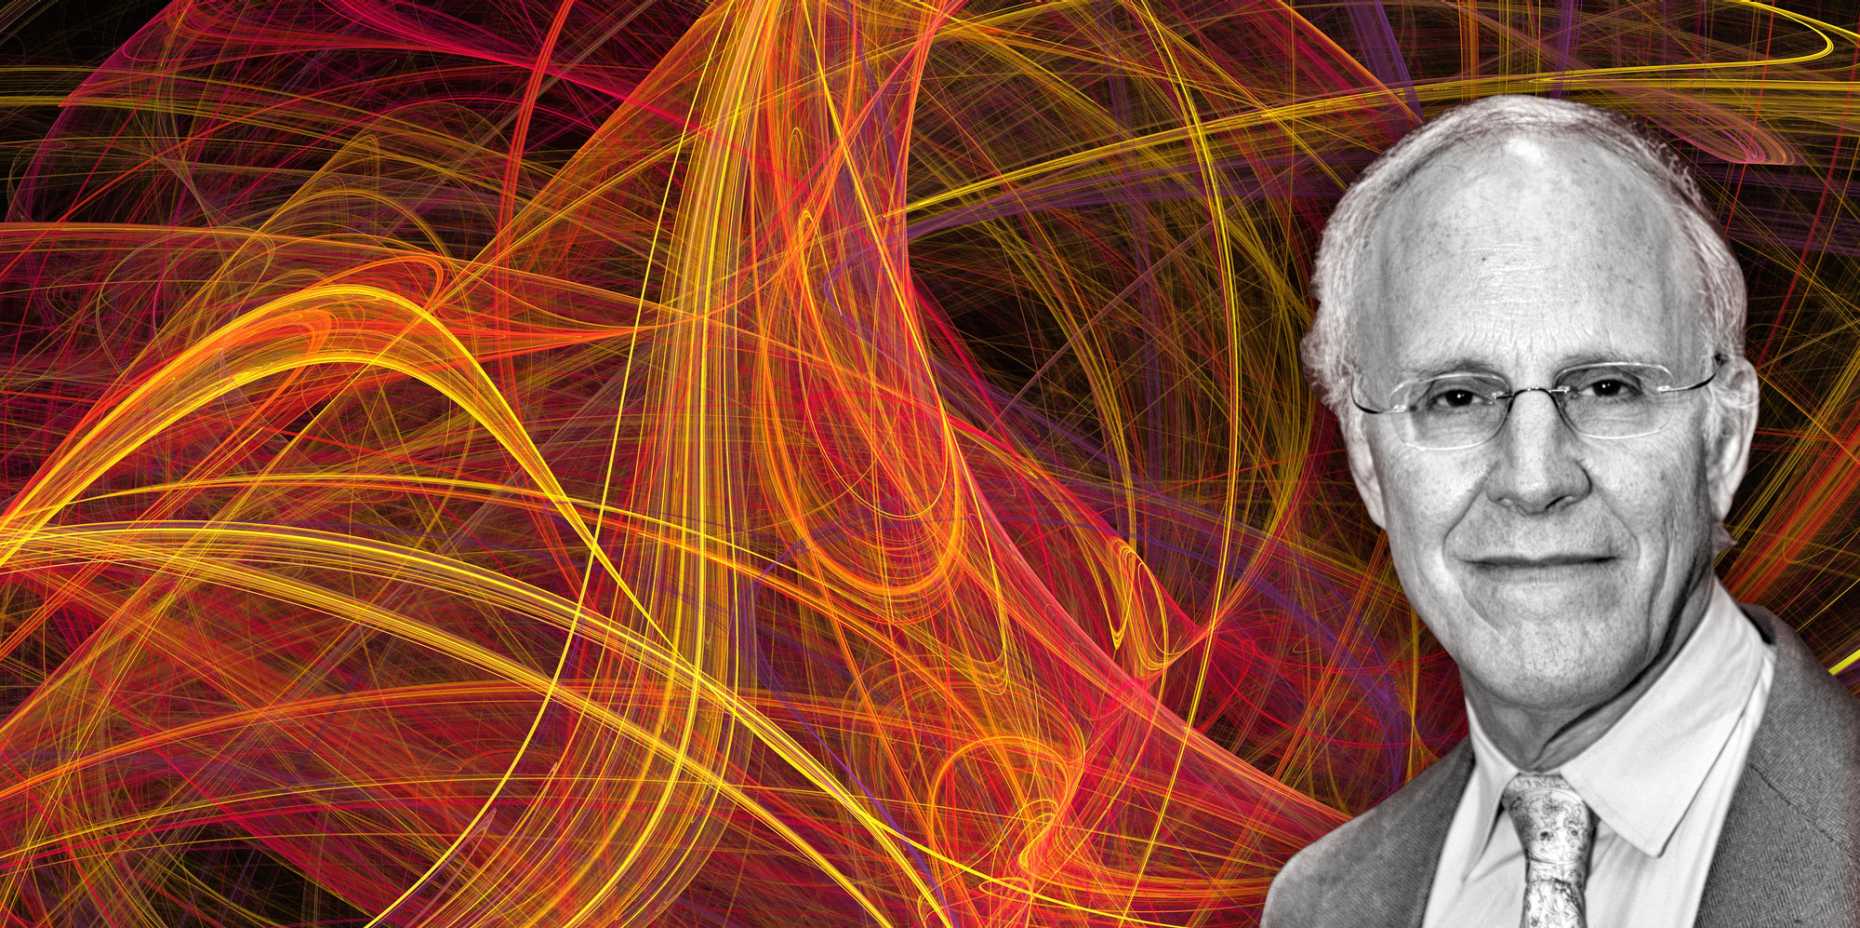 Enlarged view: Why do particles act more freely the closer they are to each other and what does that say about the world? Nobel laureate David Gross explains. (Images: Getty Images/LANL)